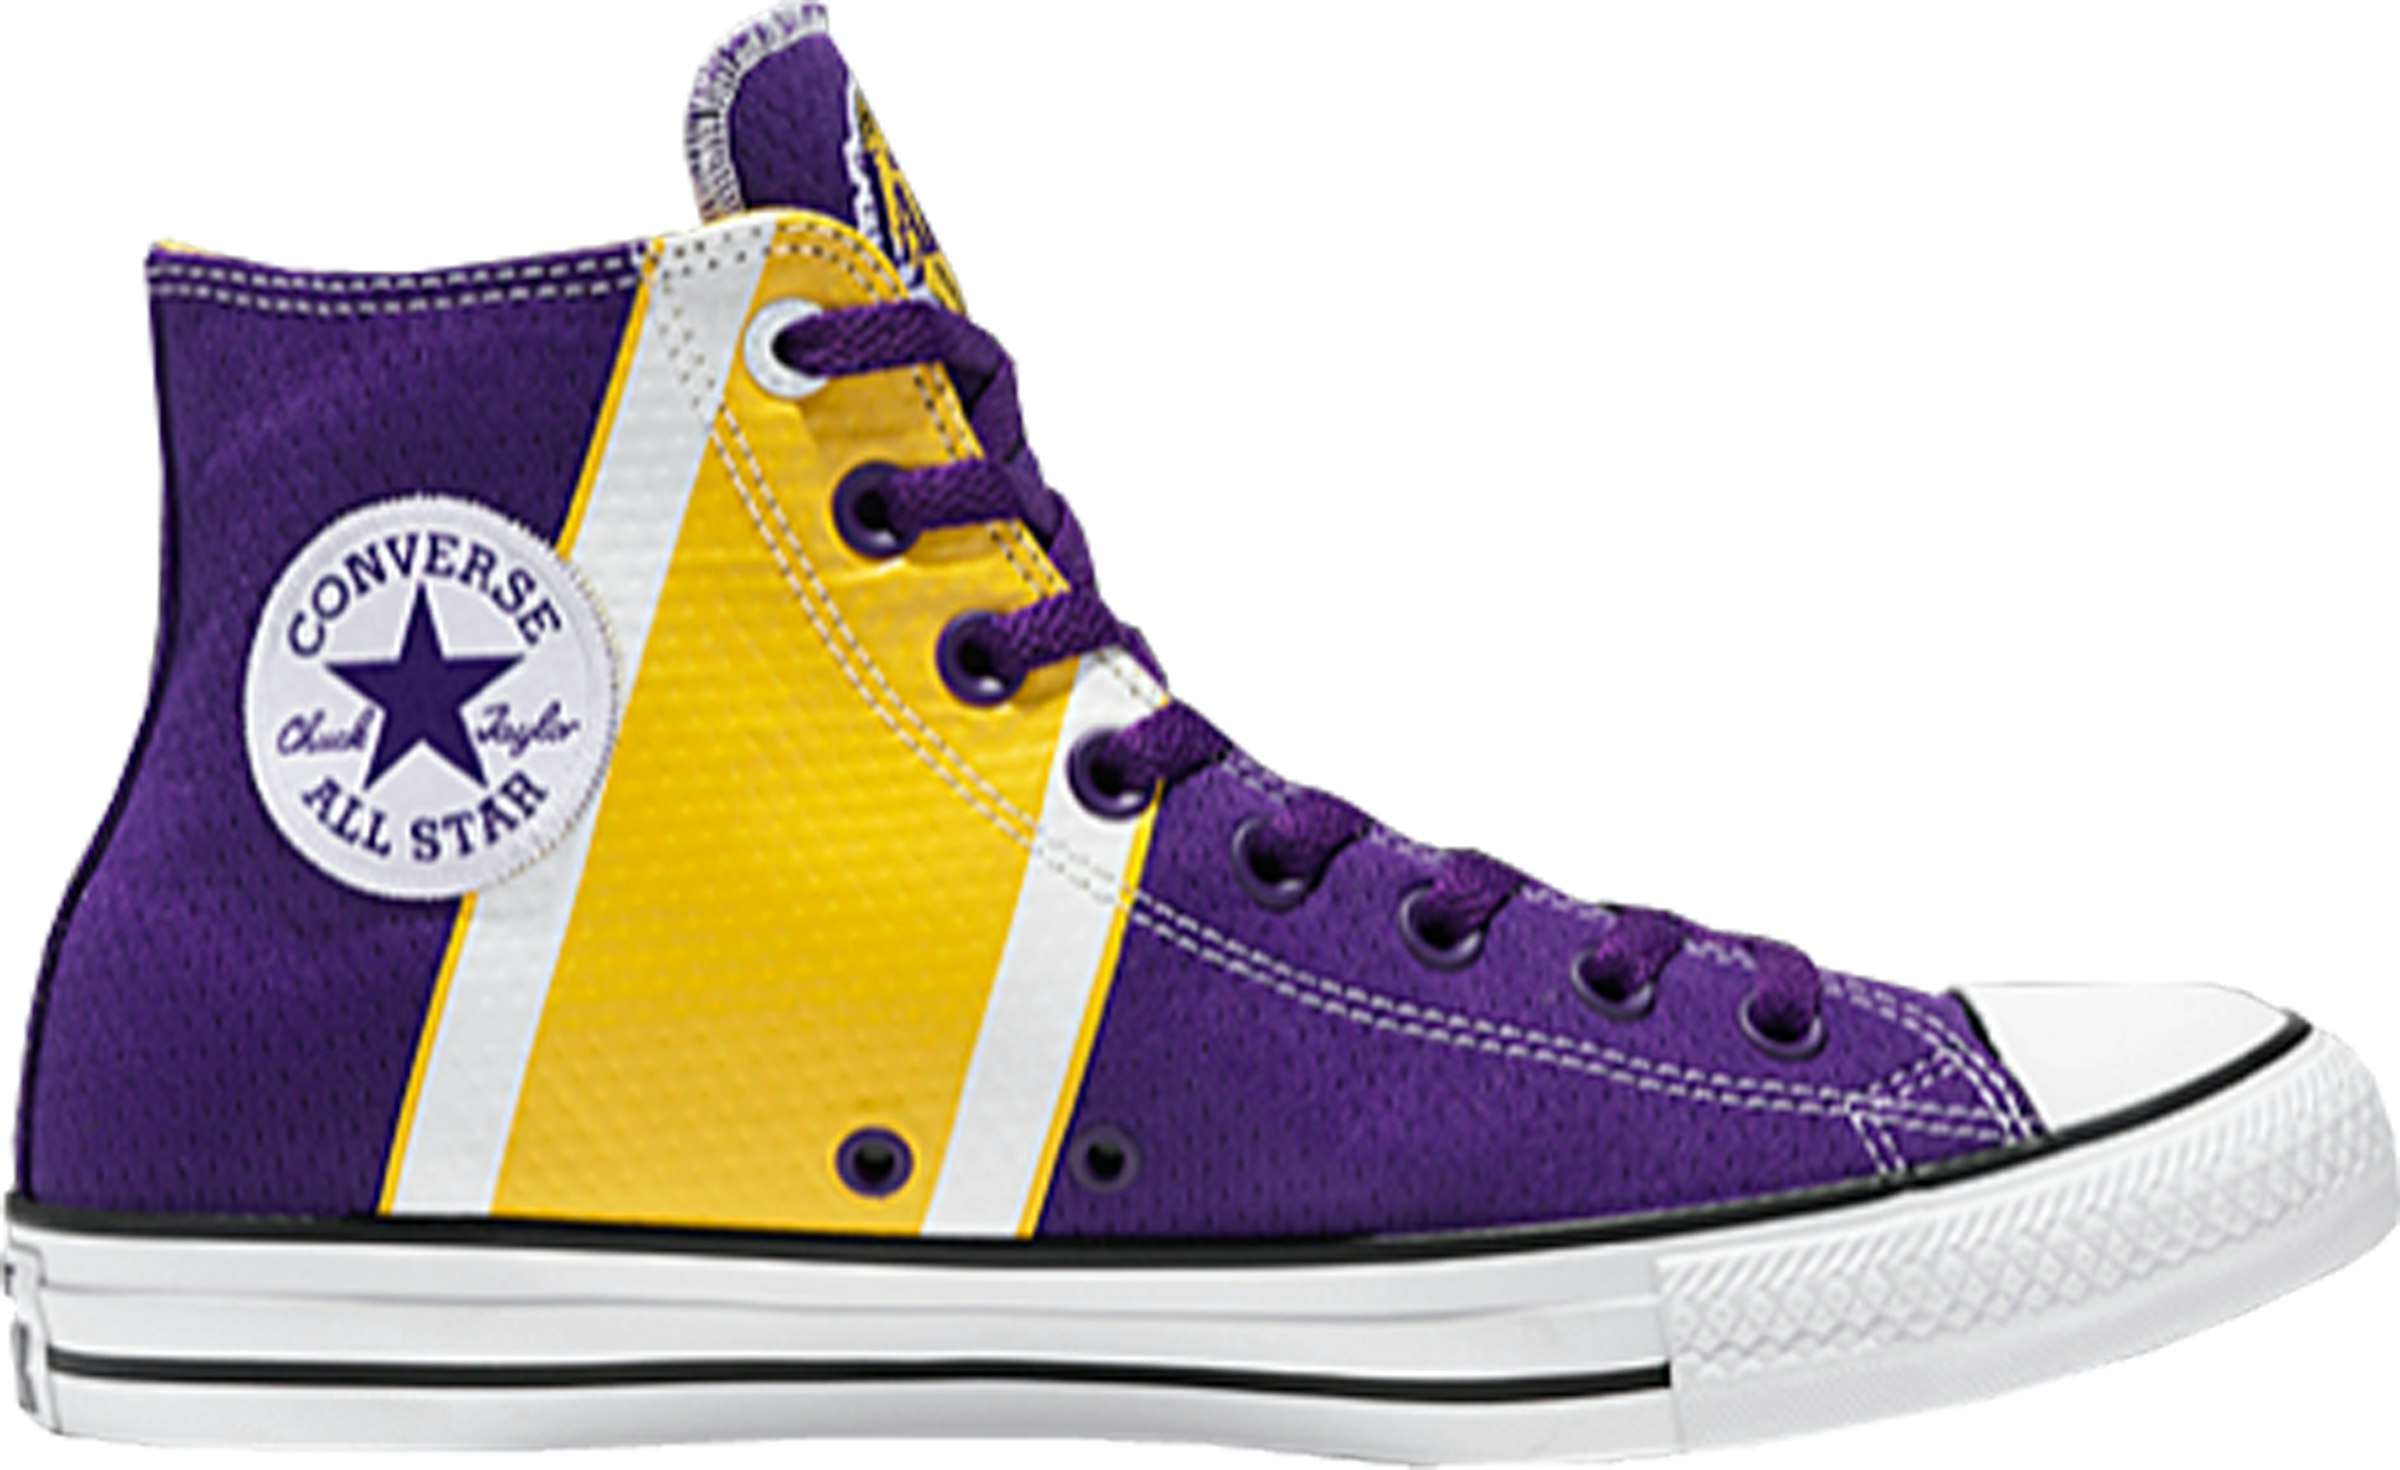 Chuck Taylor All-Star 70 Los Angeles Lakers Men's - 159415C - US